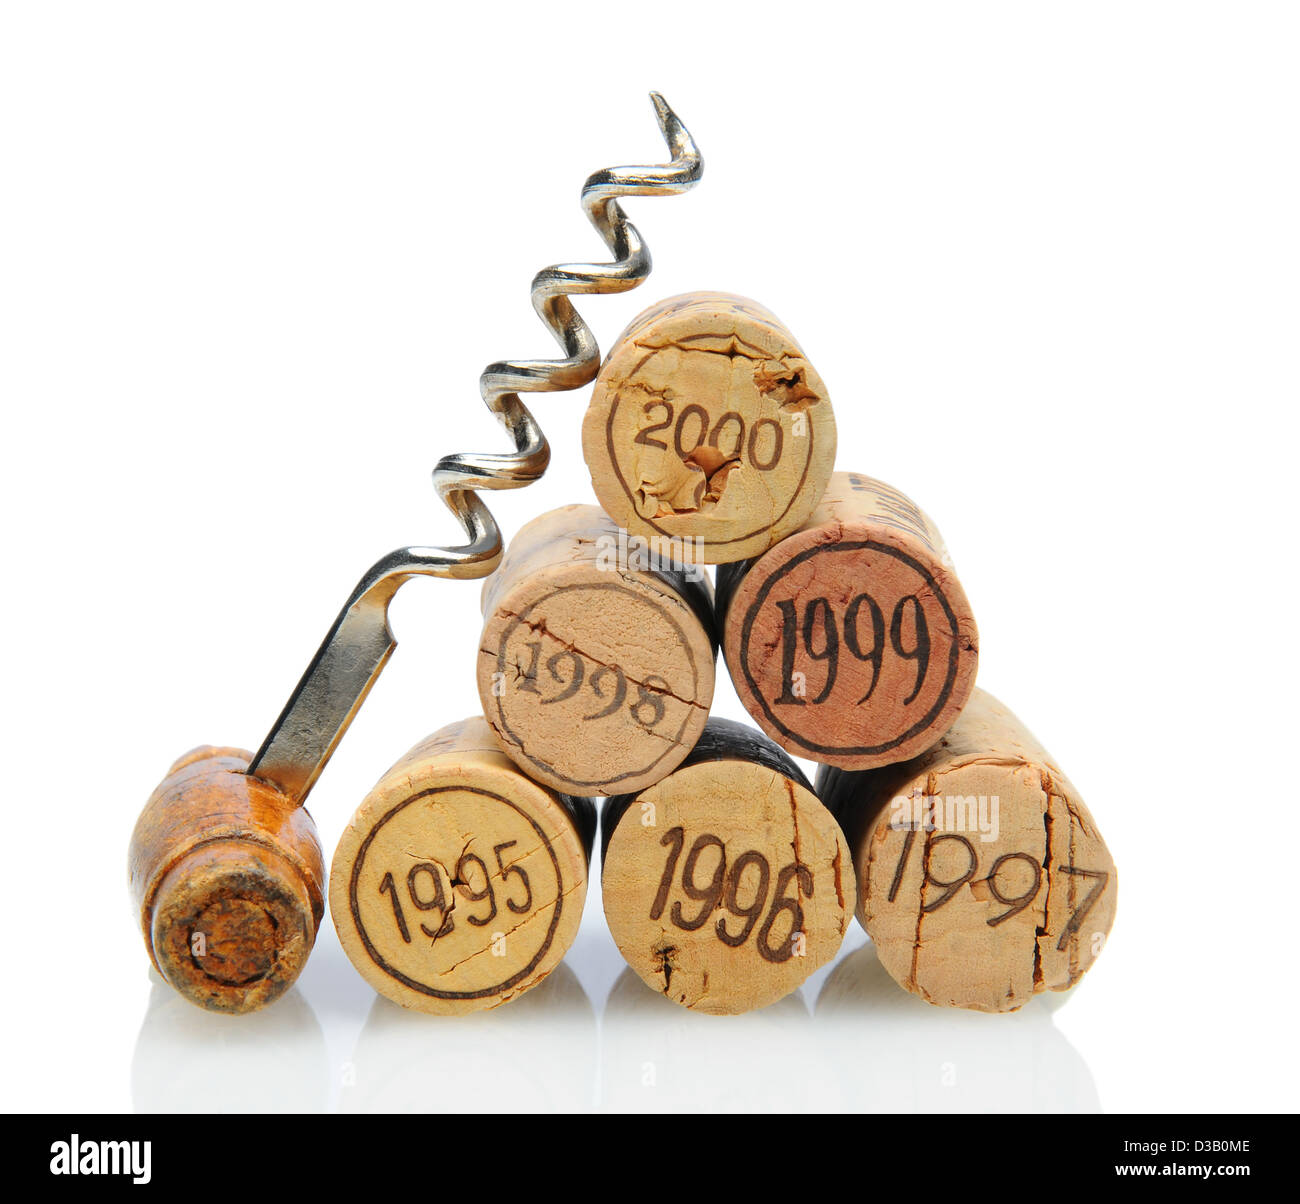 Closeup of a group of vintage dated wine corks and an antique corkscrew on white with reflection. Stock Photo